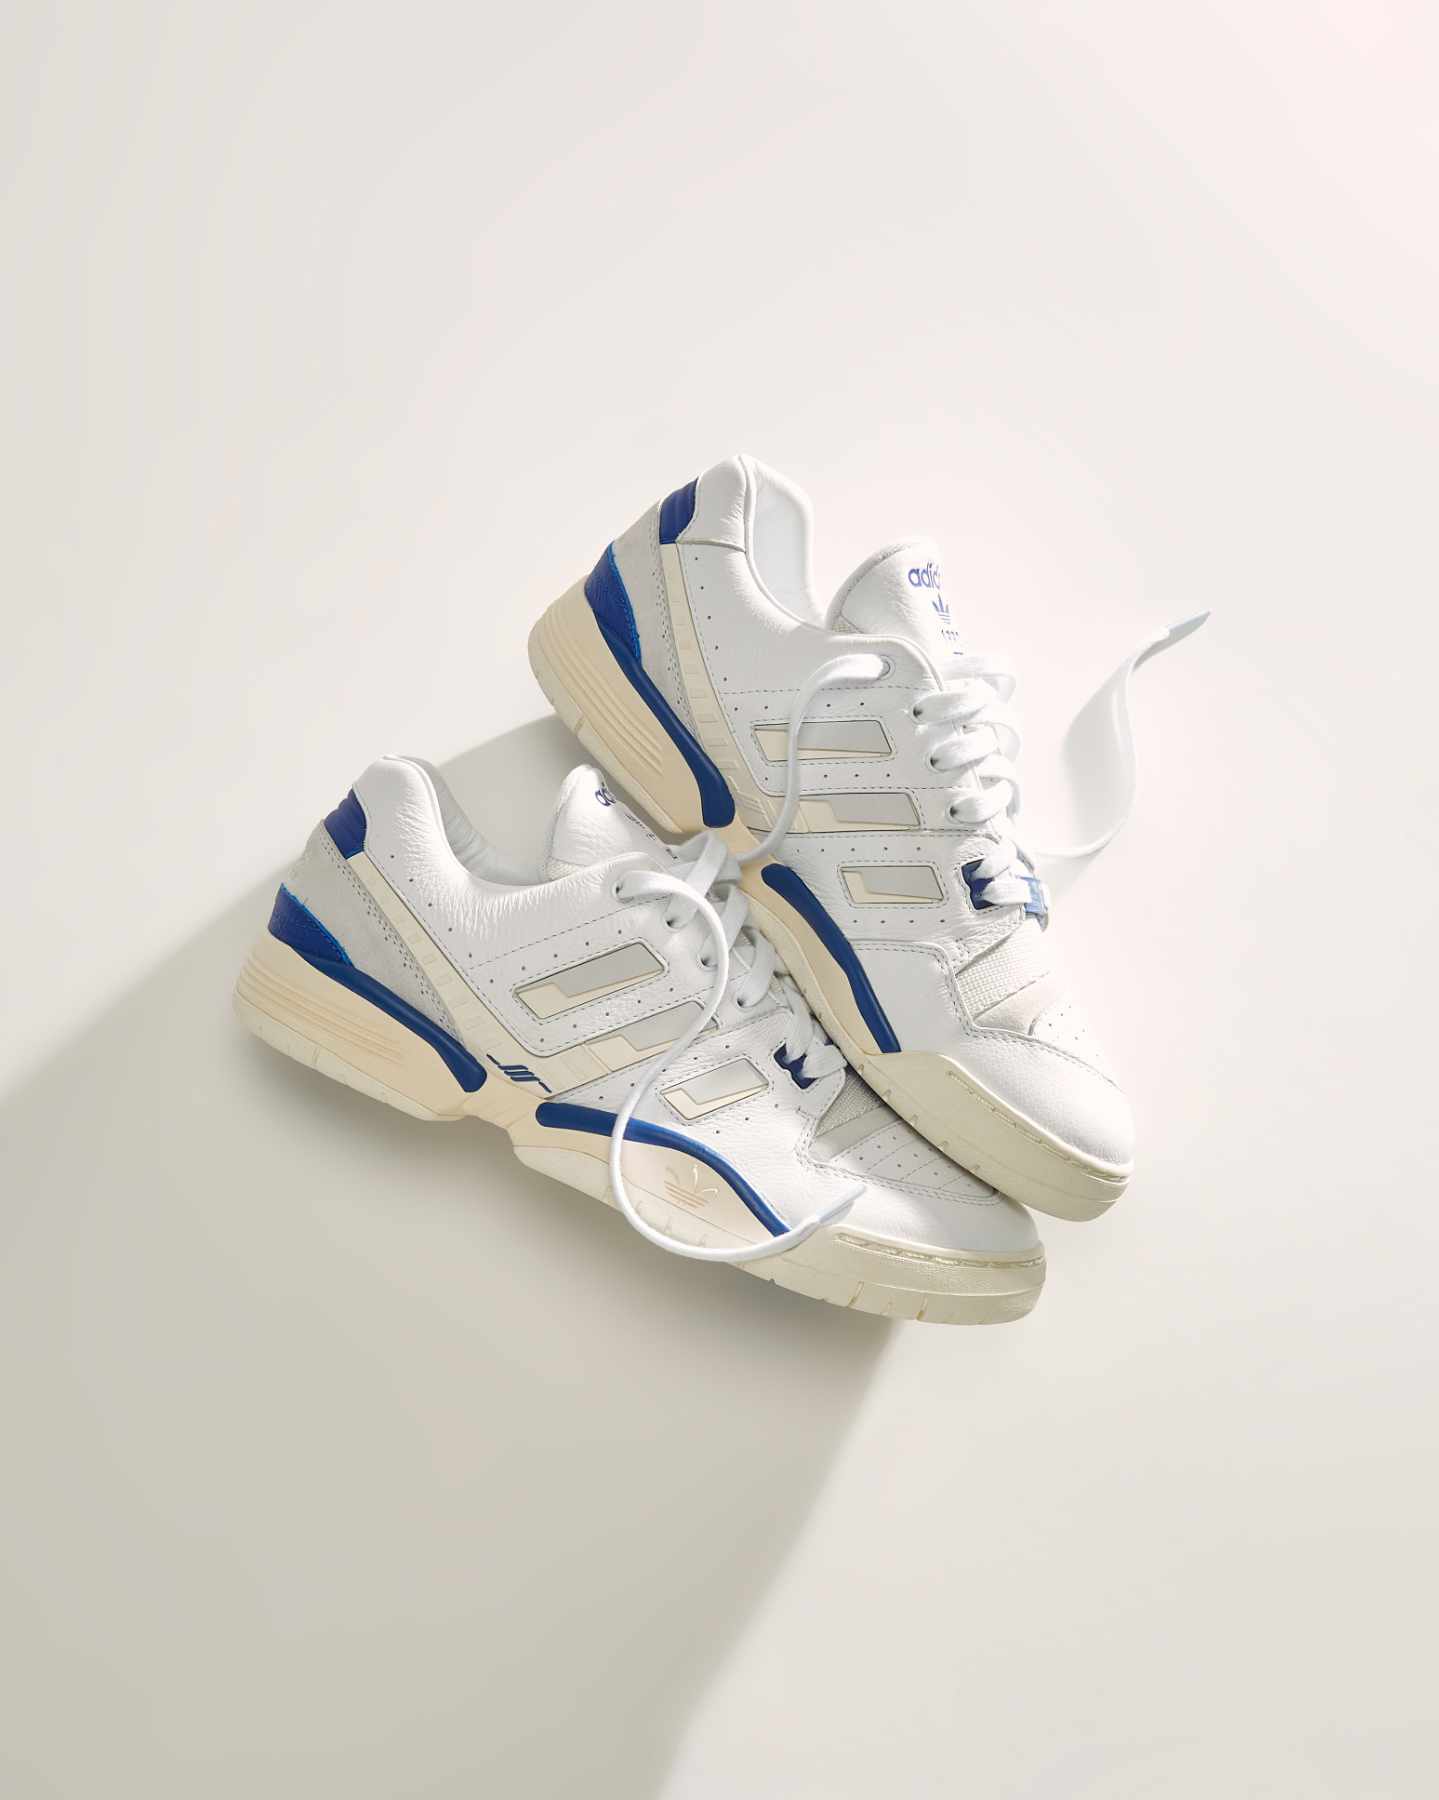 A product photo of KITH & adidas' Torsion Edberg Fall 2023 Classics shoe collaboration prior to drop date